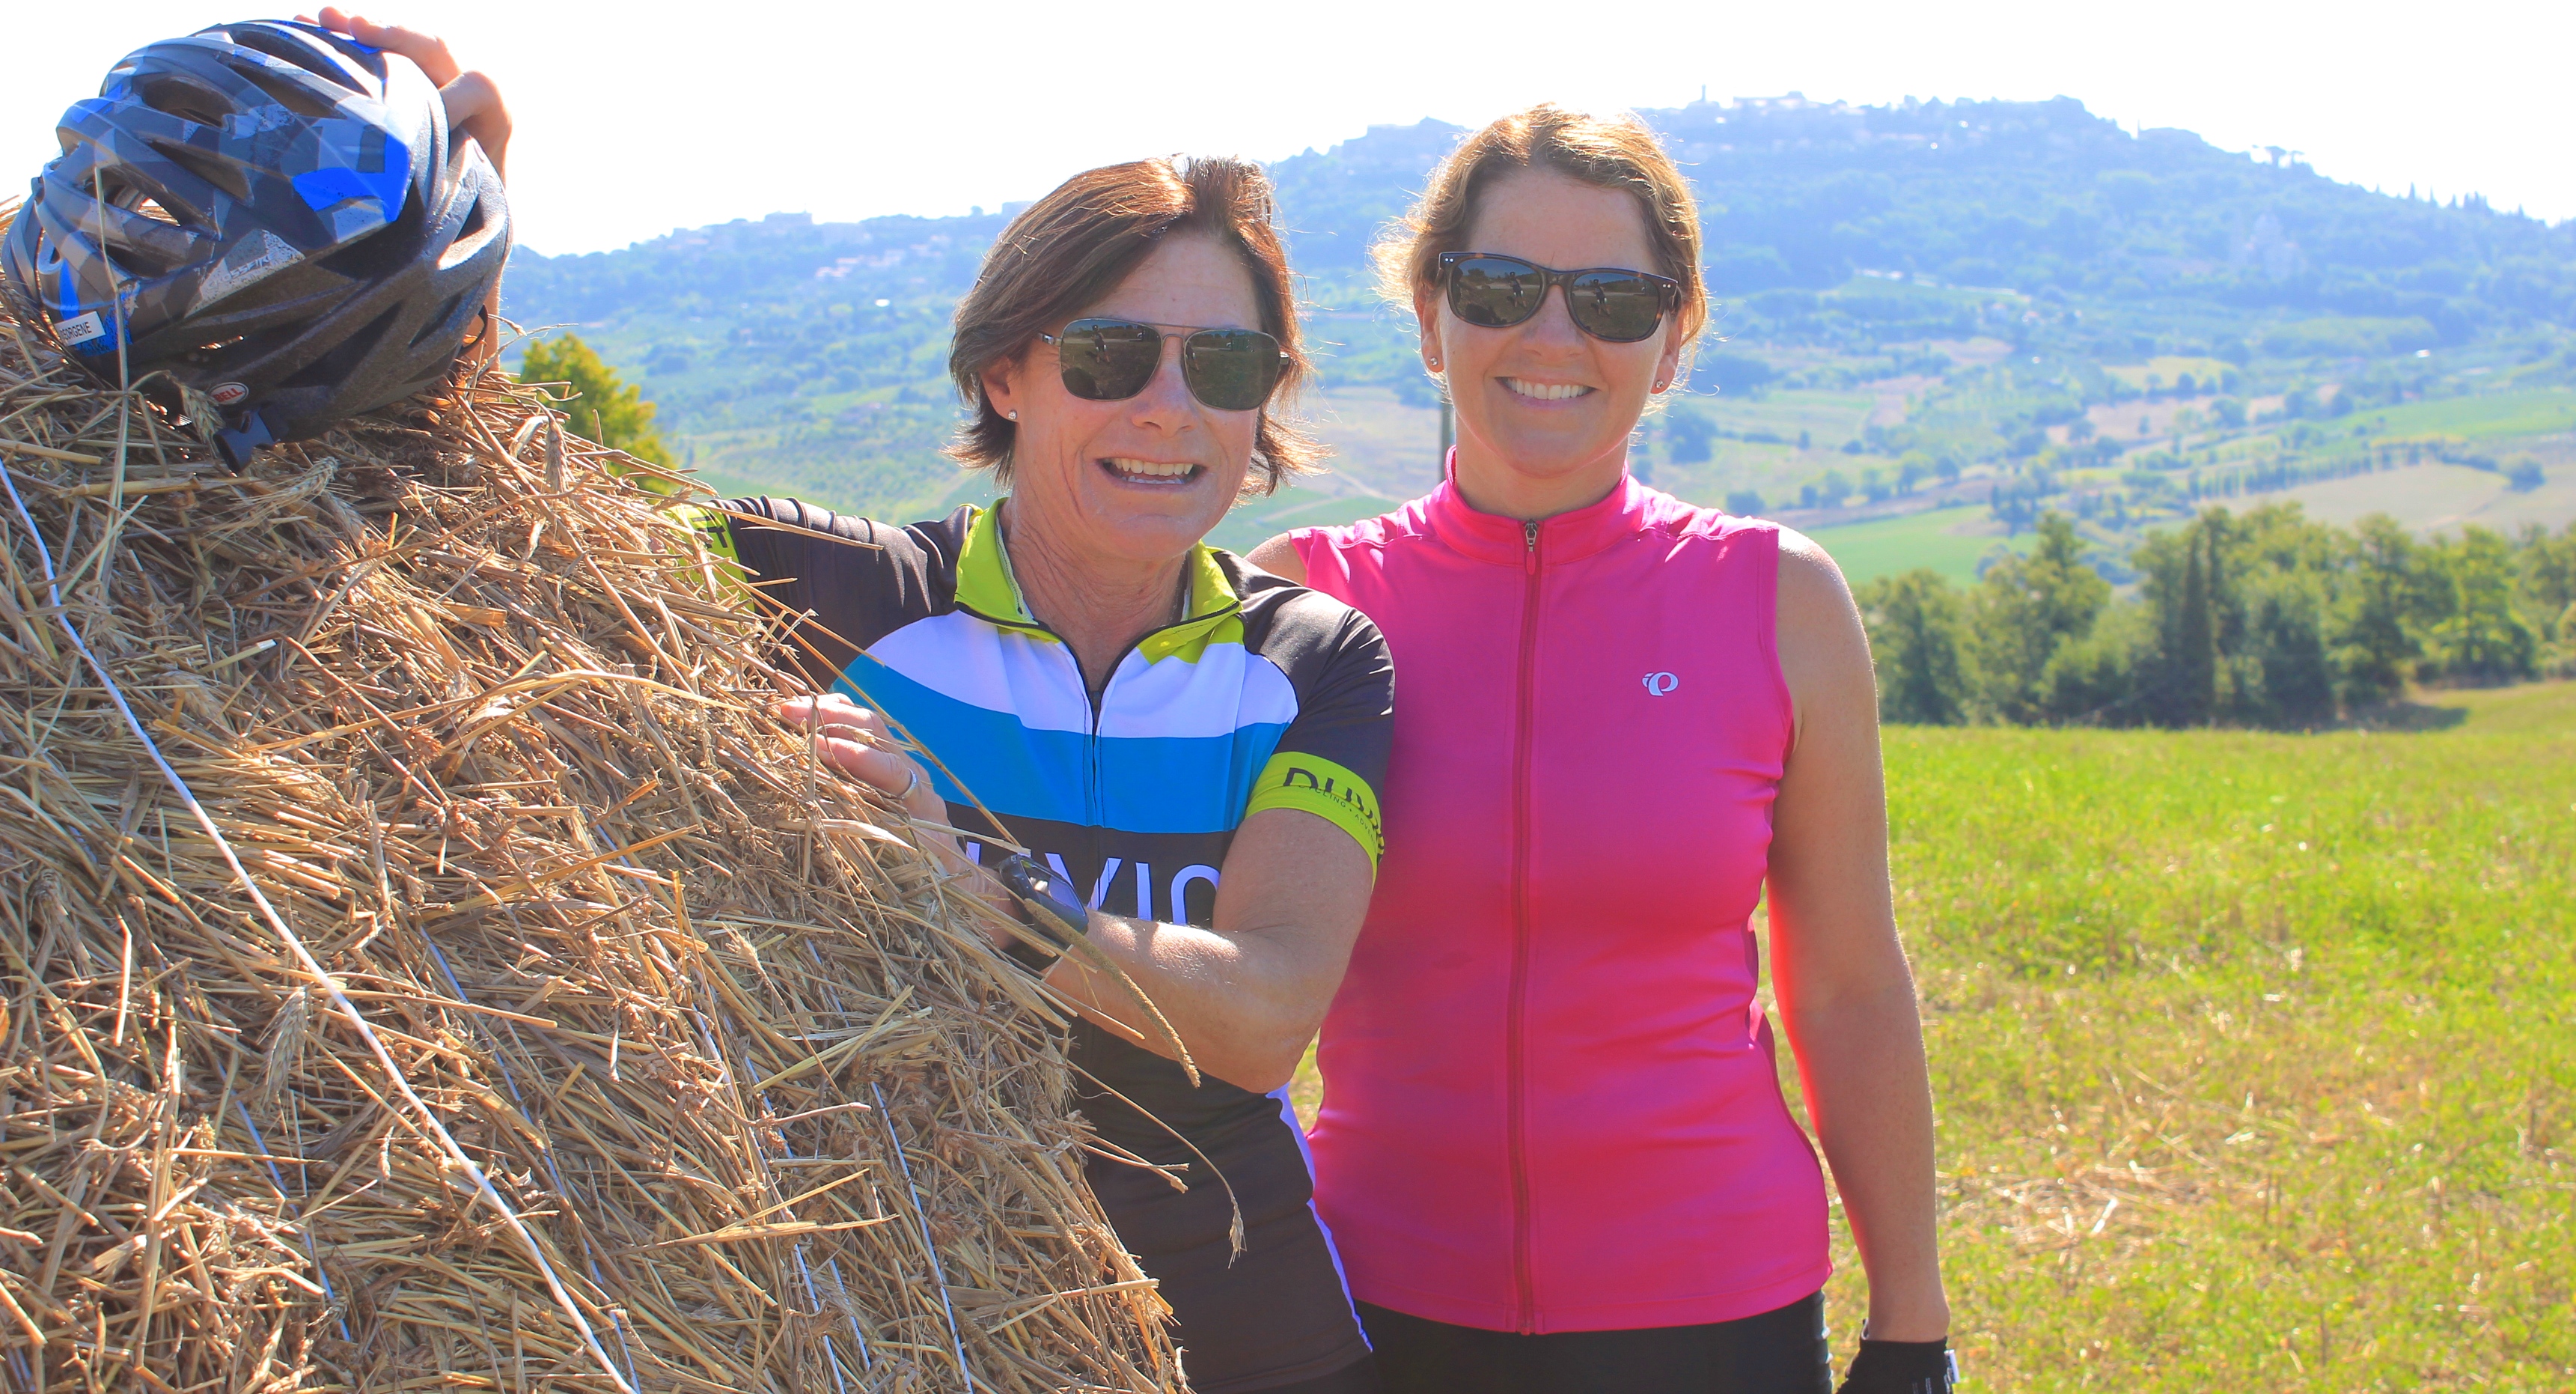 Women-Only Tuscany Tour